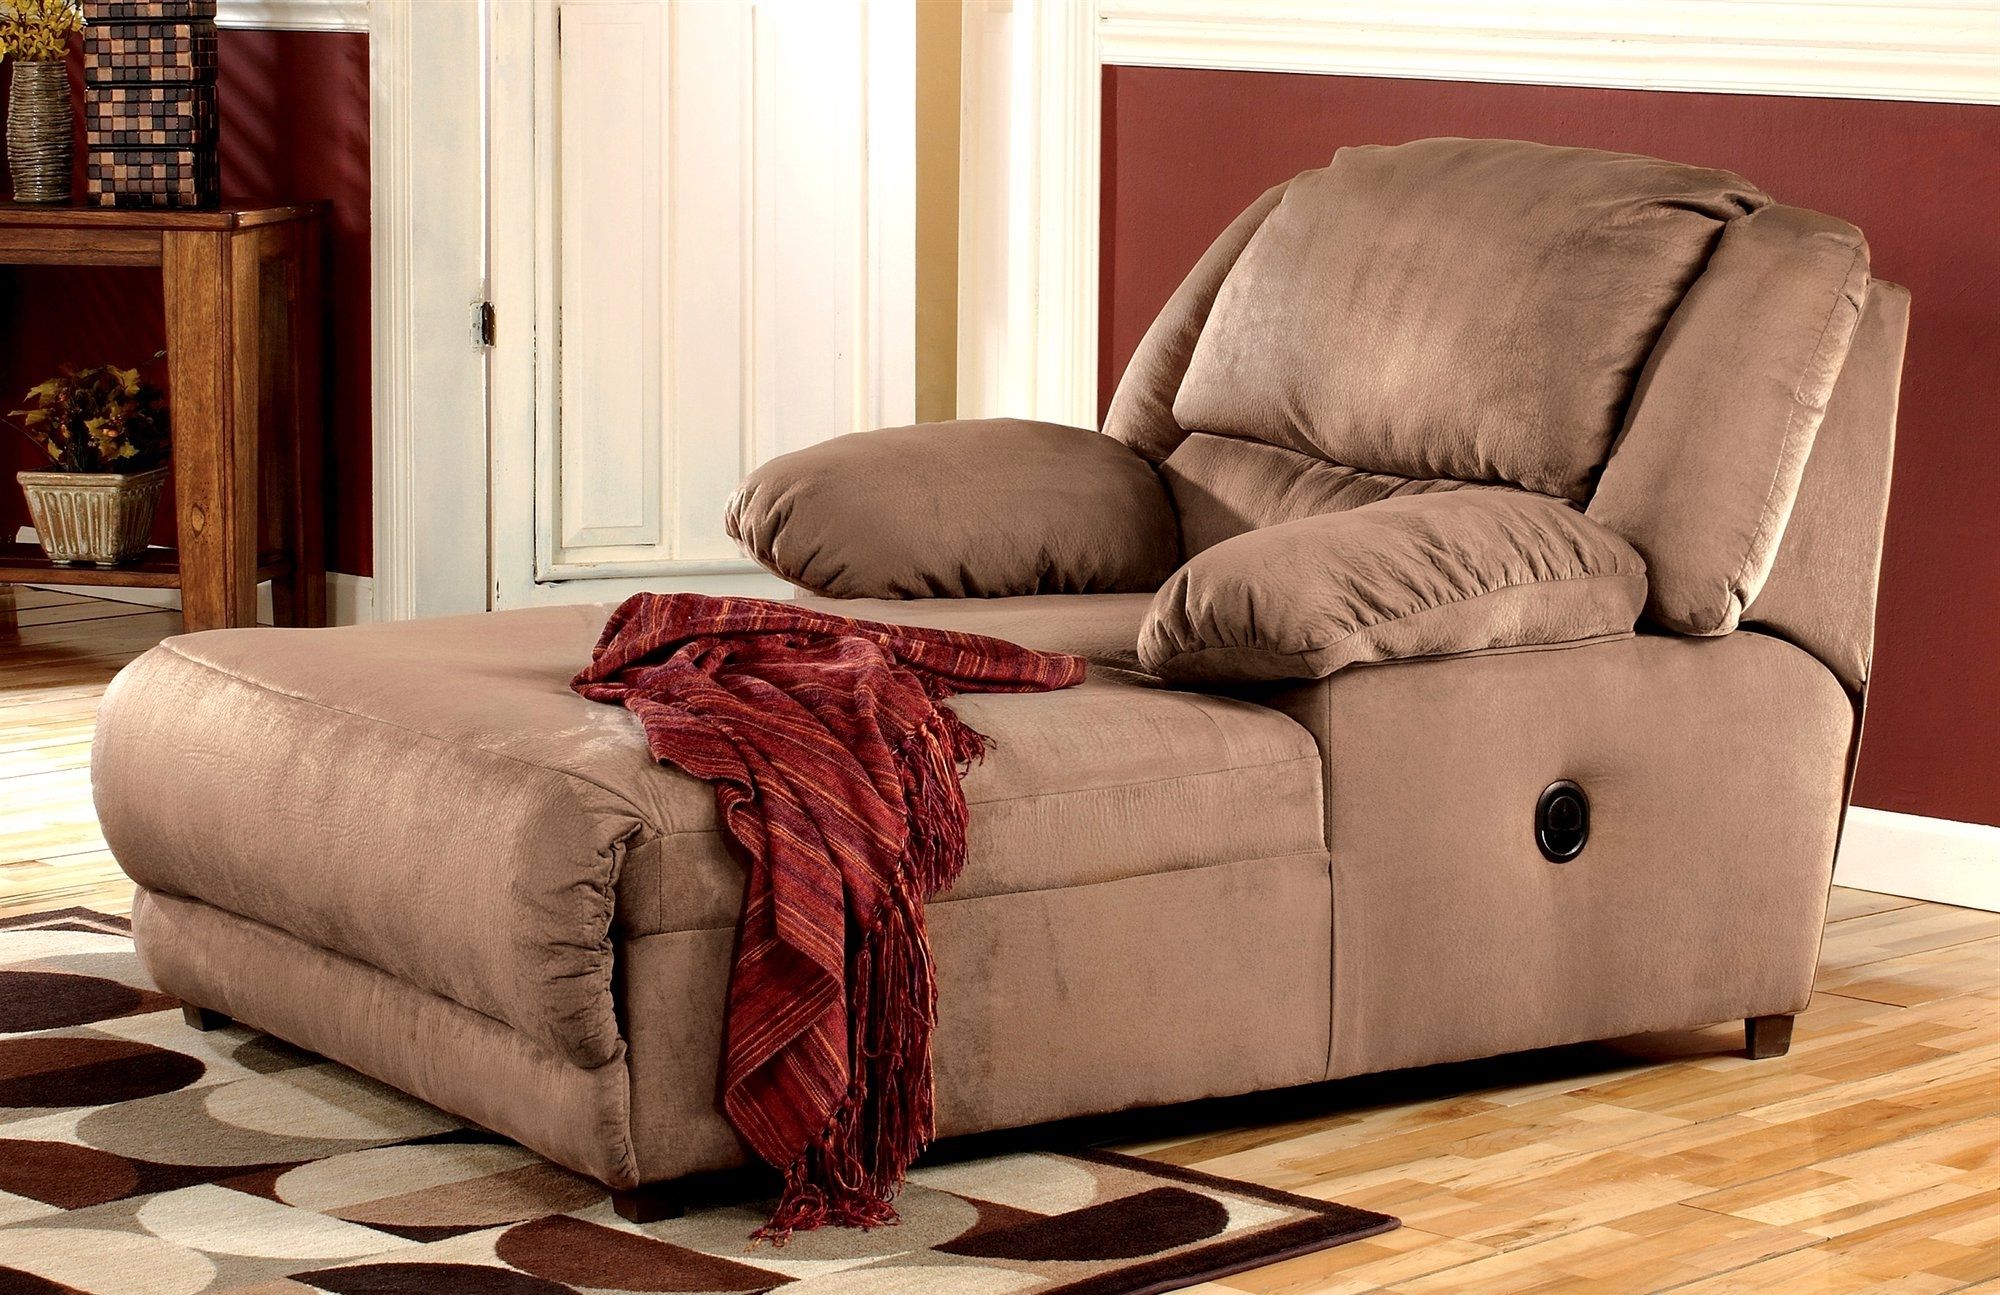 15 Ideas of Ashley Furniture Chaise Lounge Chairs